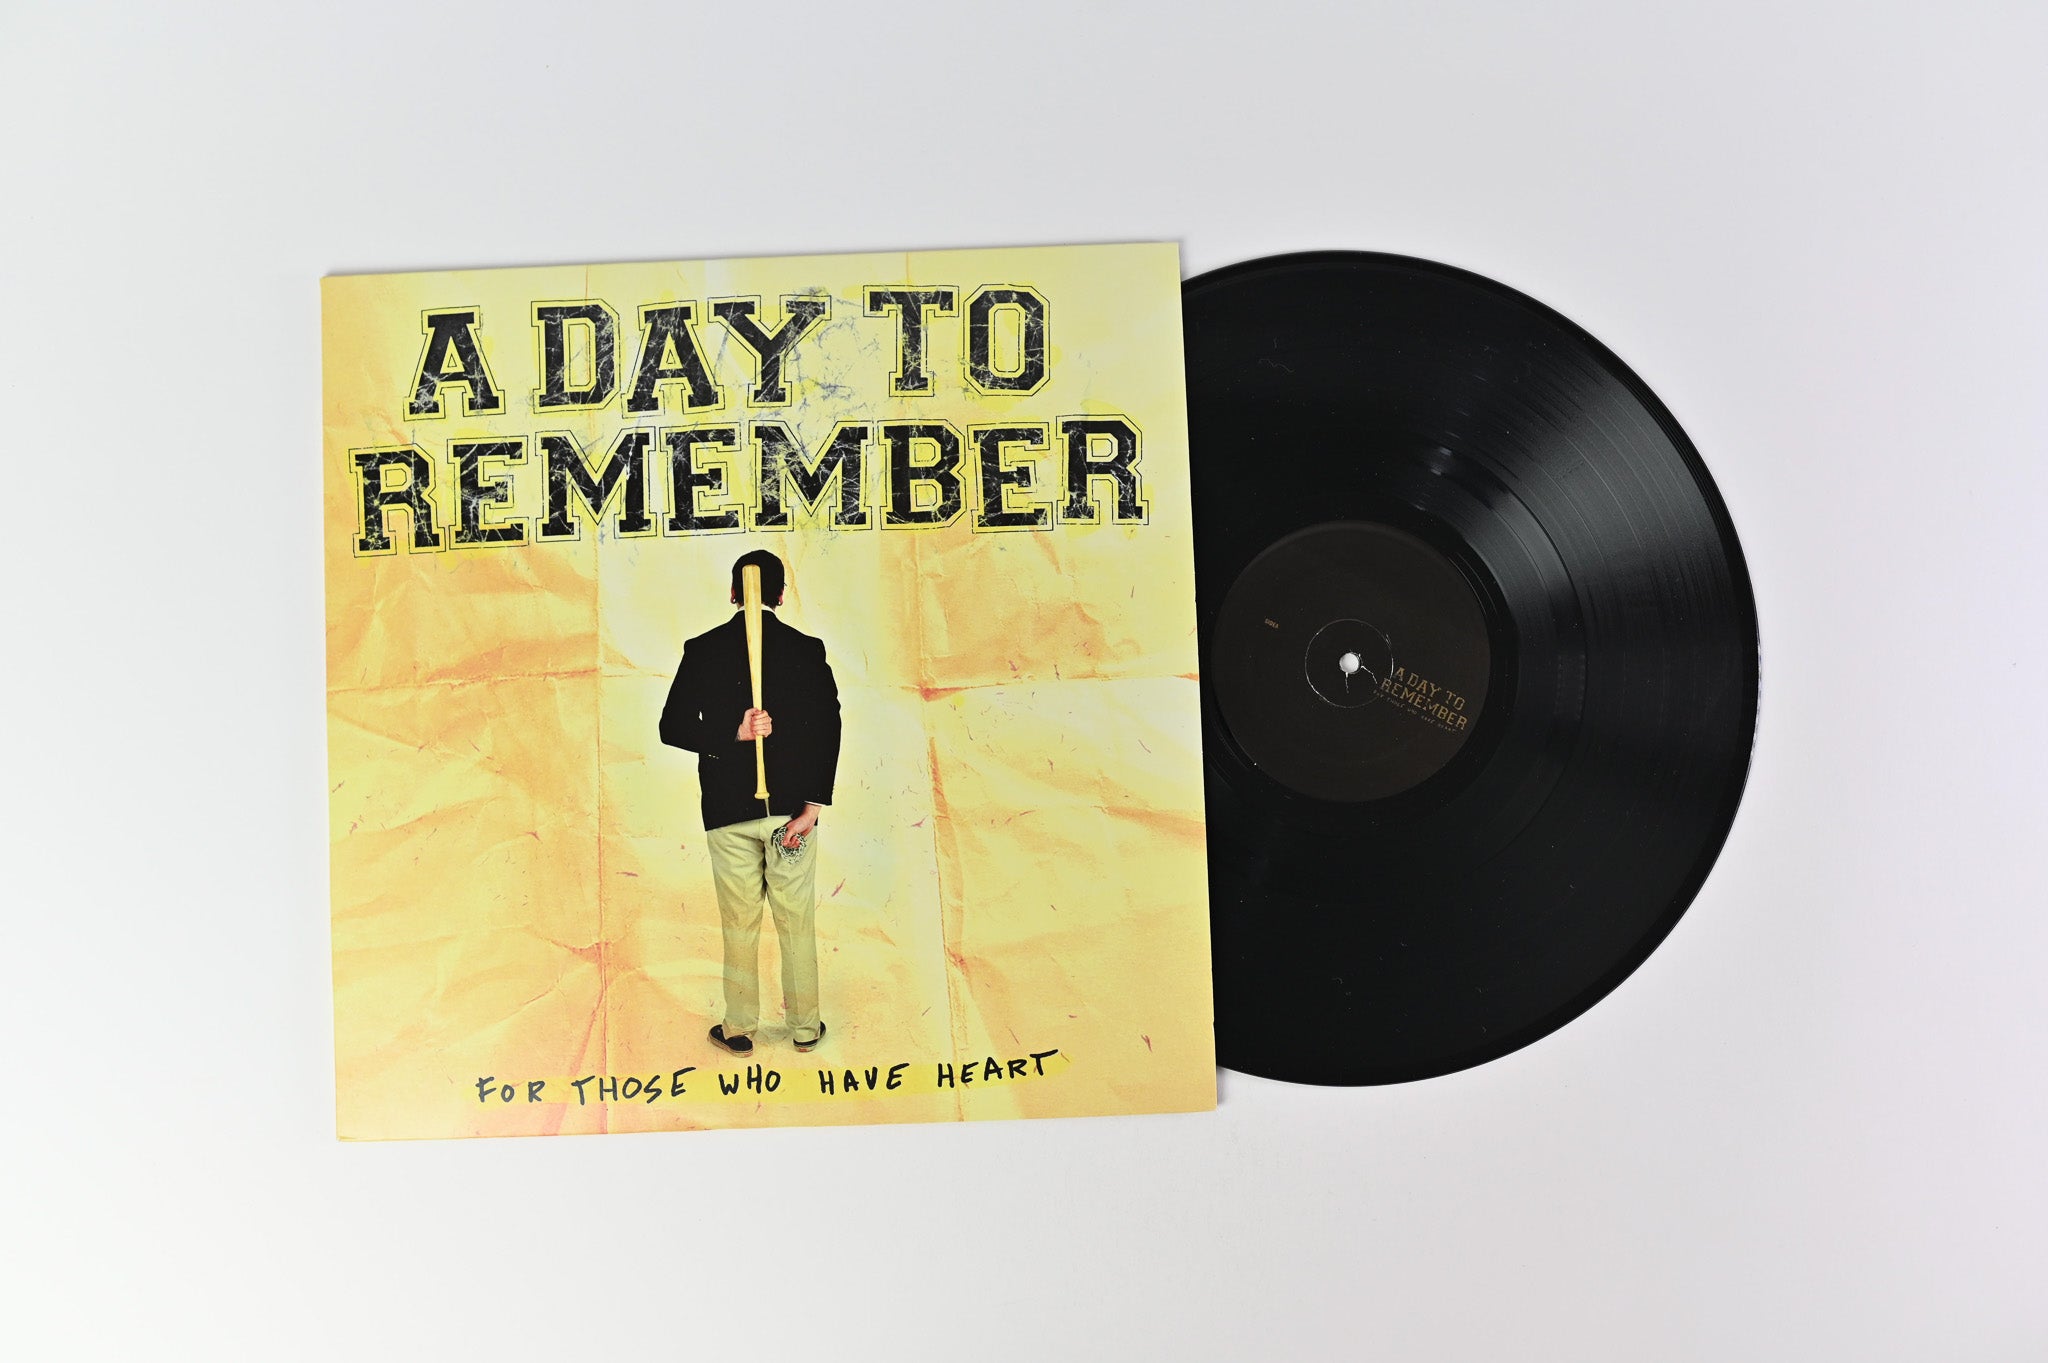 A Day To Remember - For Those Who Have Heart on Victory Repress